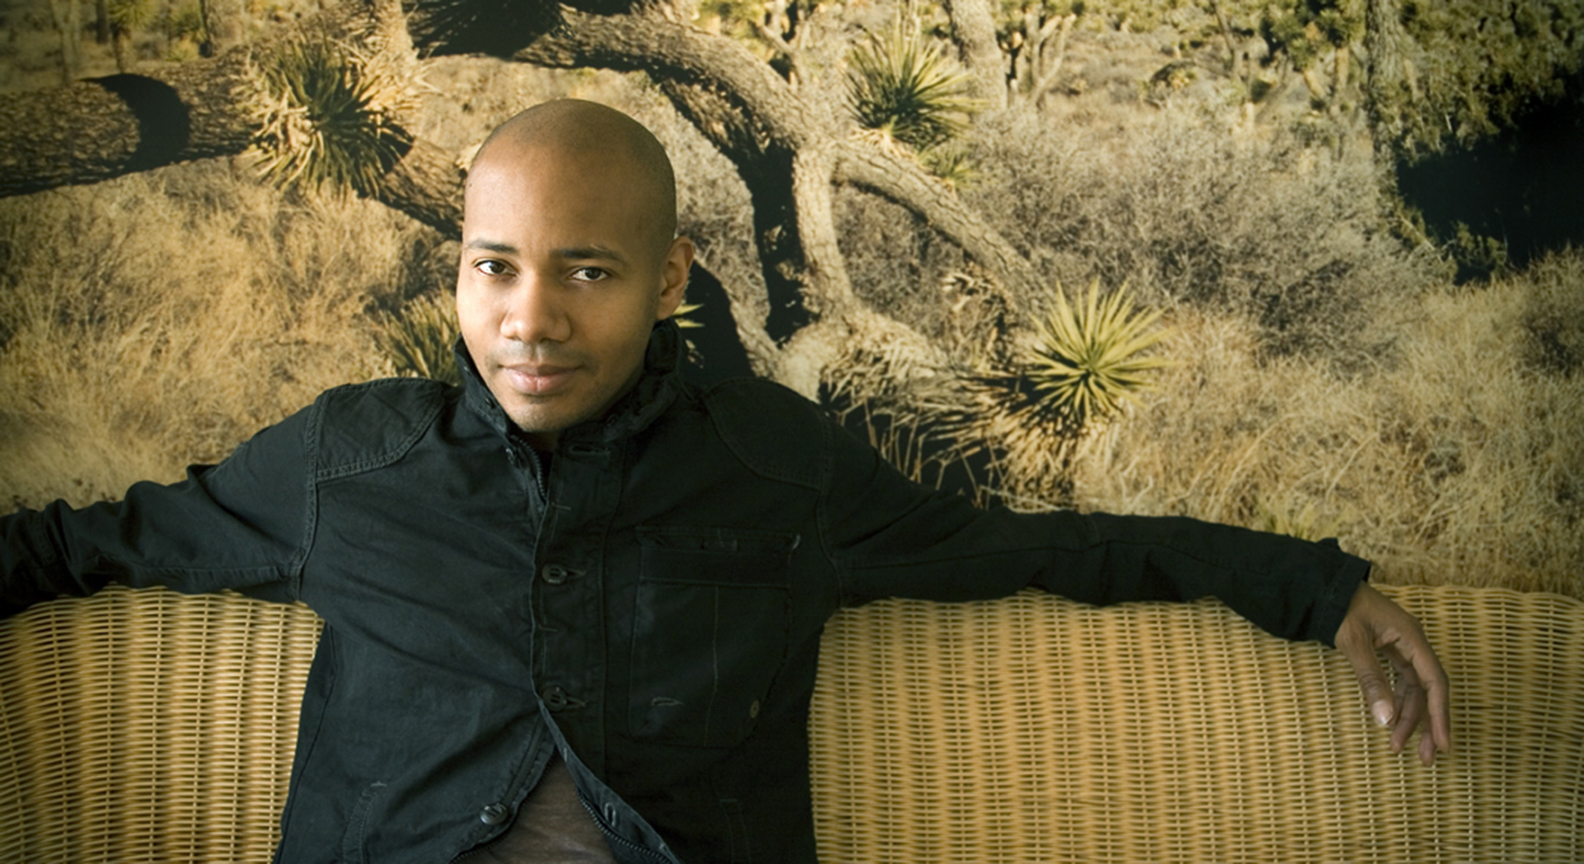 DJ Spooky wearing a dark jacket while lounging on a light tan couch.